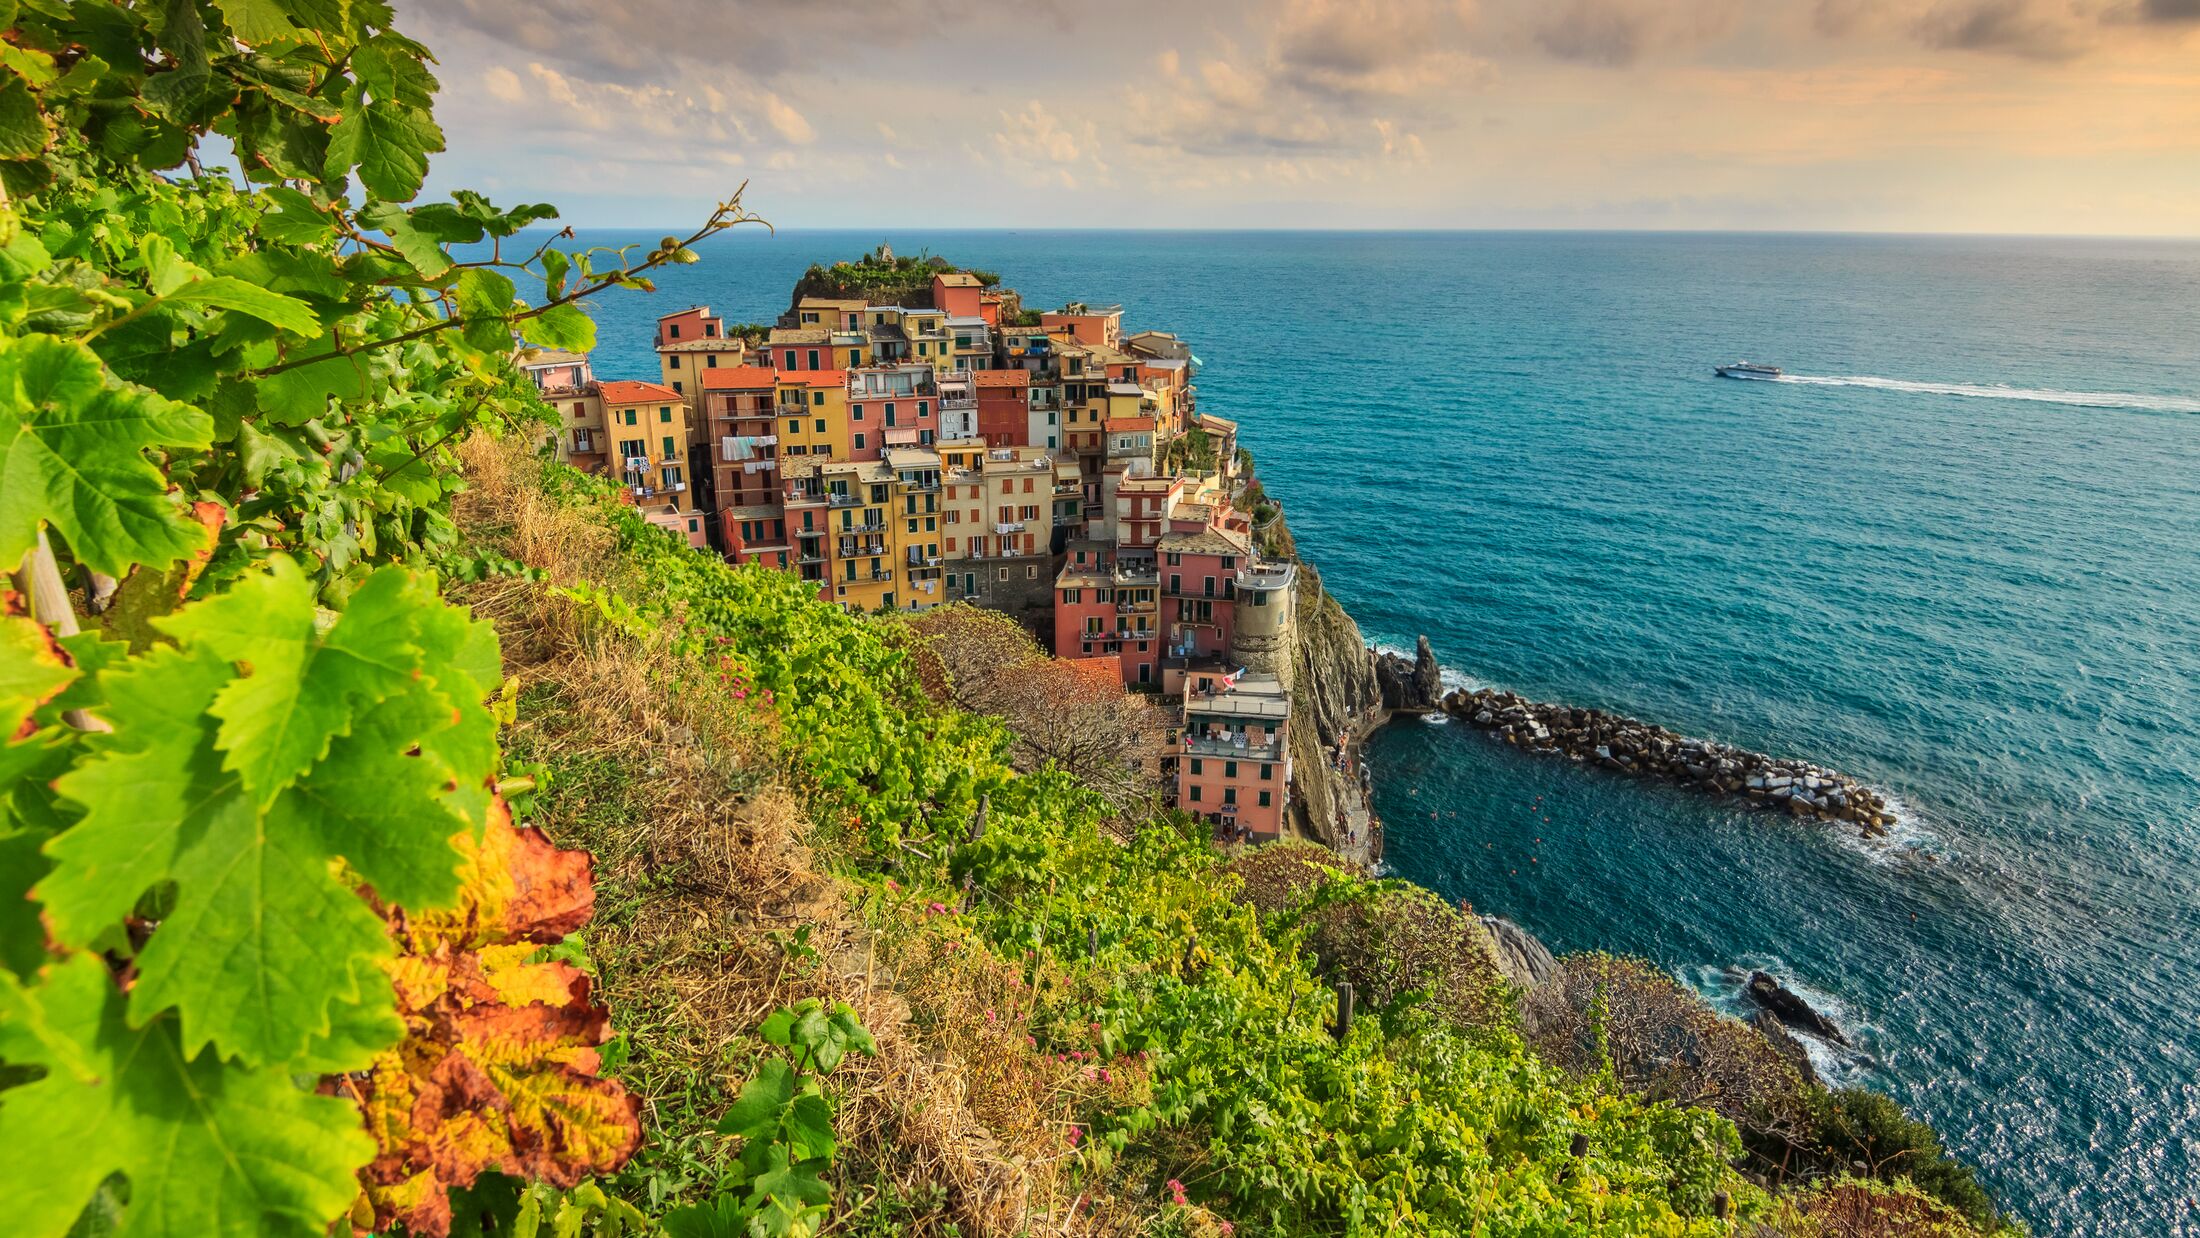 The famous wineyard and beautiful riviera of Cinque Terre,Manarola town,Italy,Europe